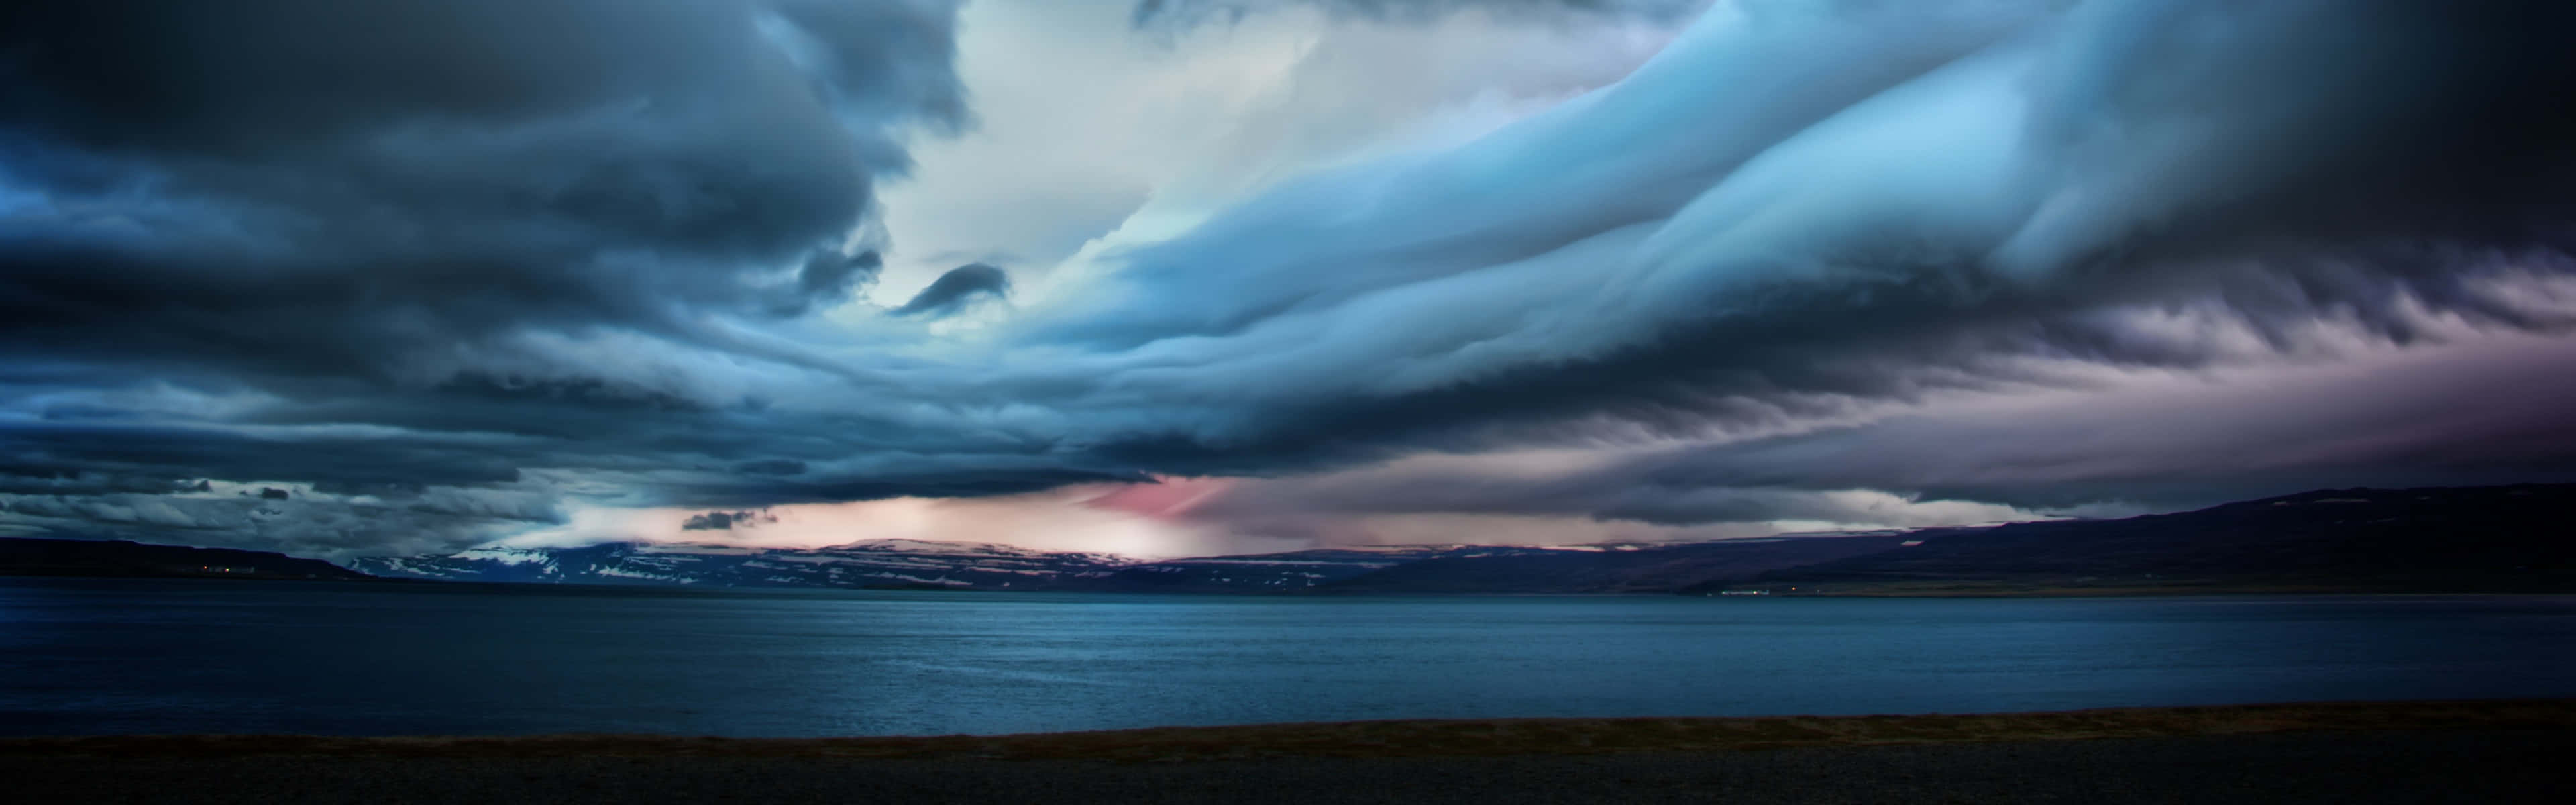 A Stormy Sky Over A Lake And Mountains Wallpaper